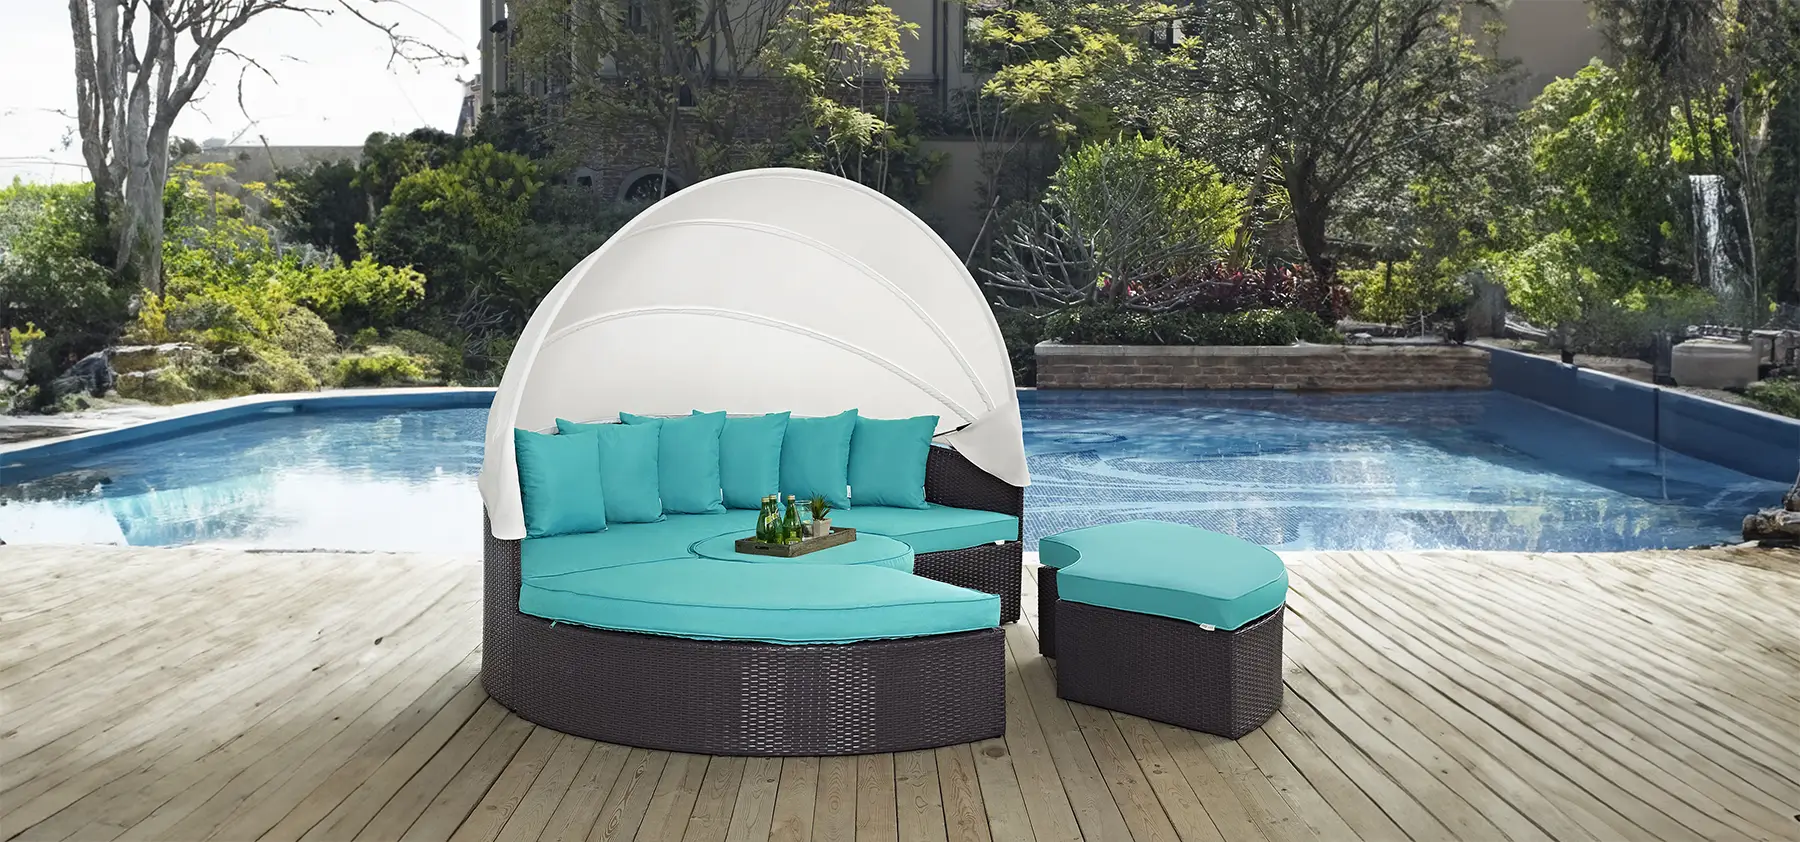 Convene Canopy Outdoor Patio Daybed in Espresso and Turquoise